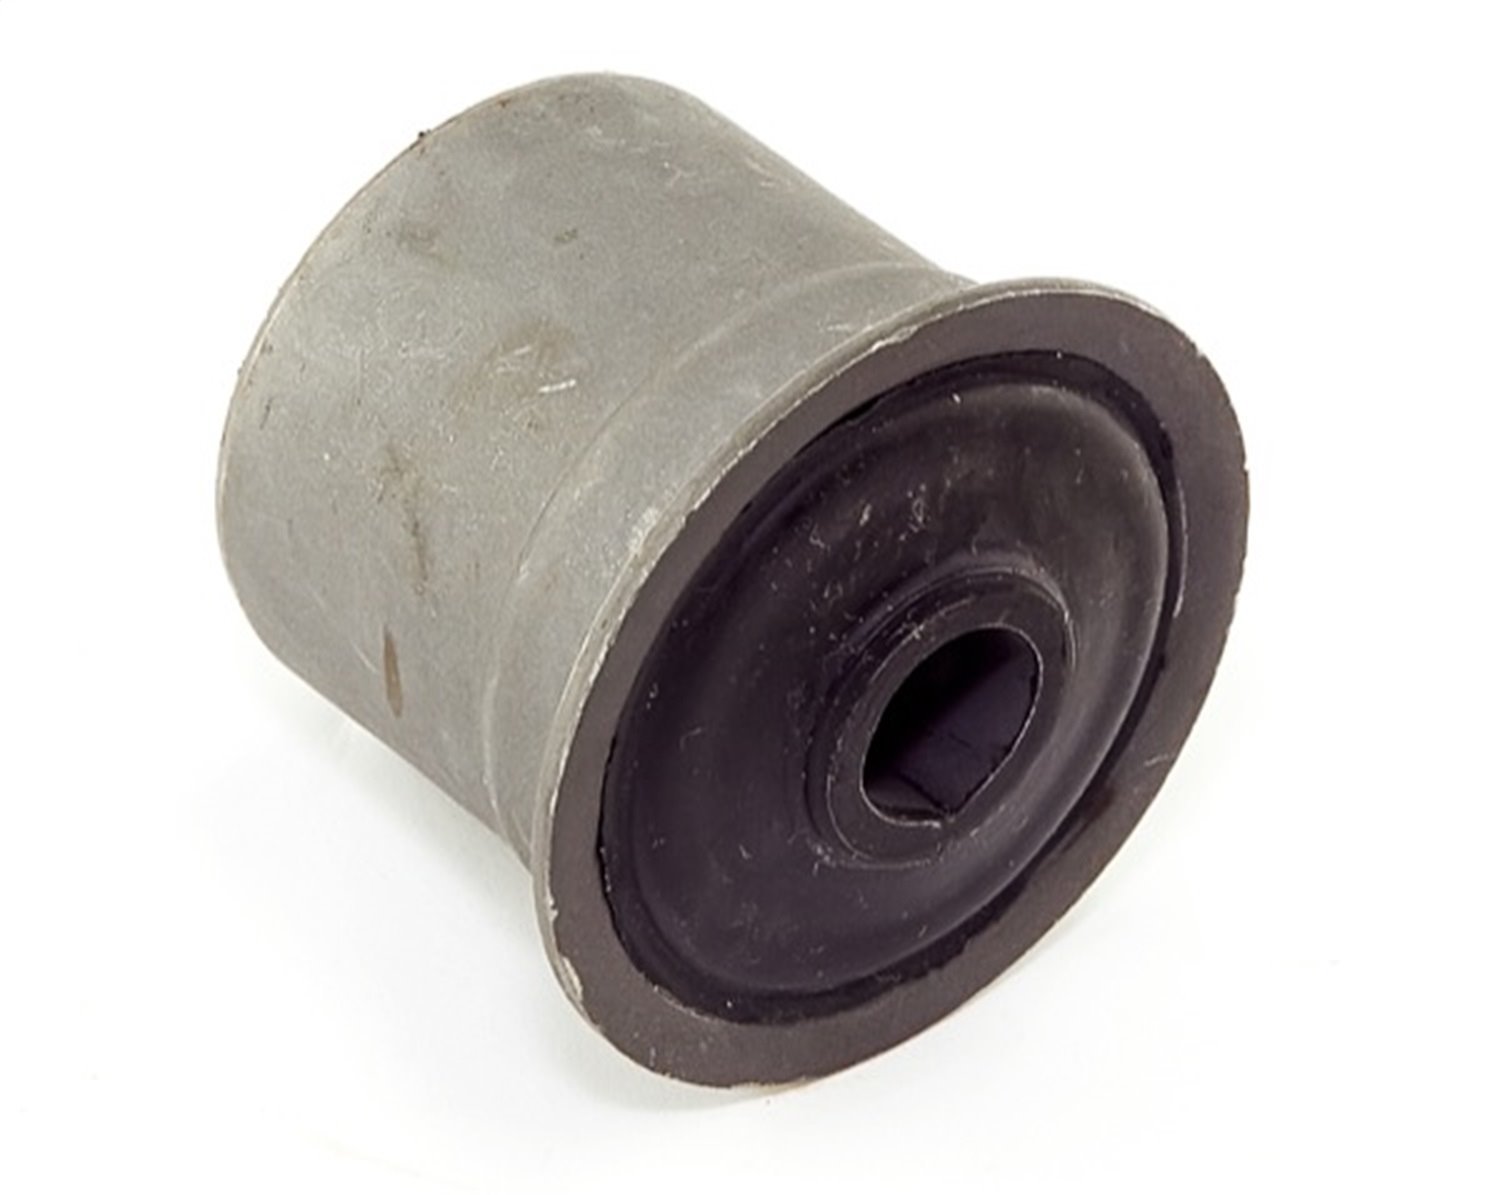 Replacement lower control arm bushing from Omix-ADA, Fits 93-98 Jeep Grand Cherokee ZJ and 99-04 WJ Jeep Grand Cherokees.